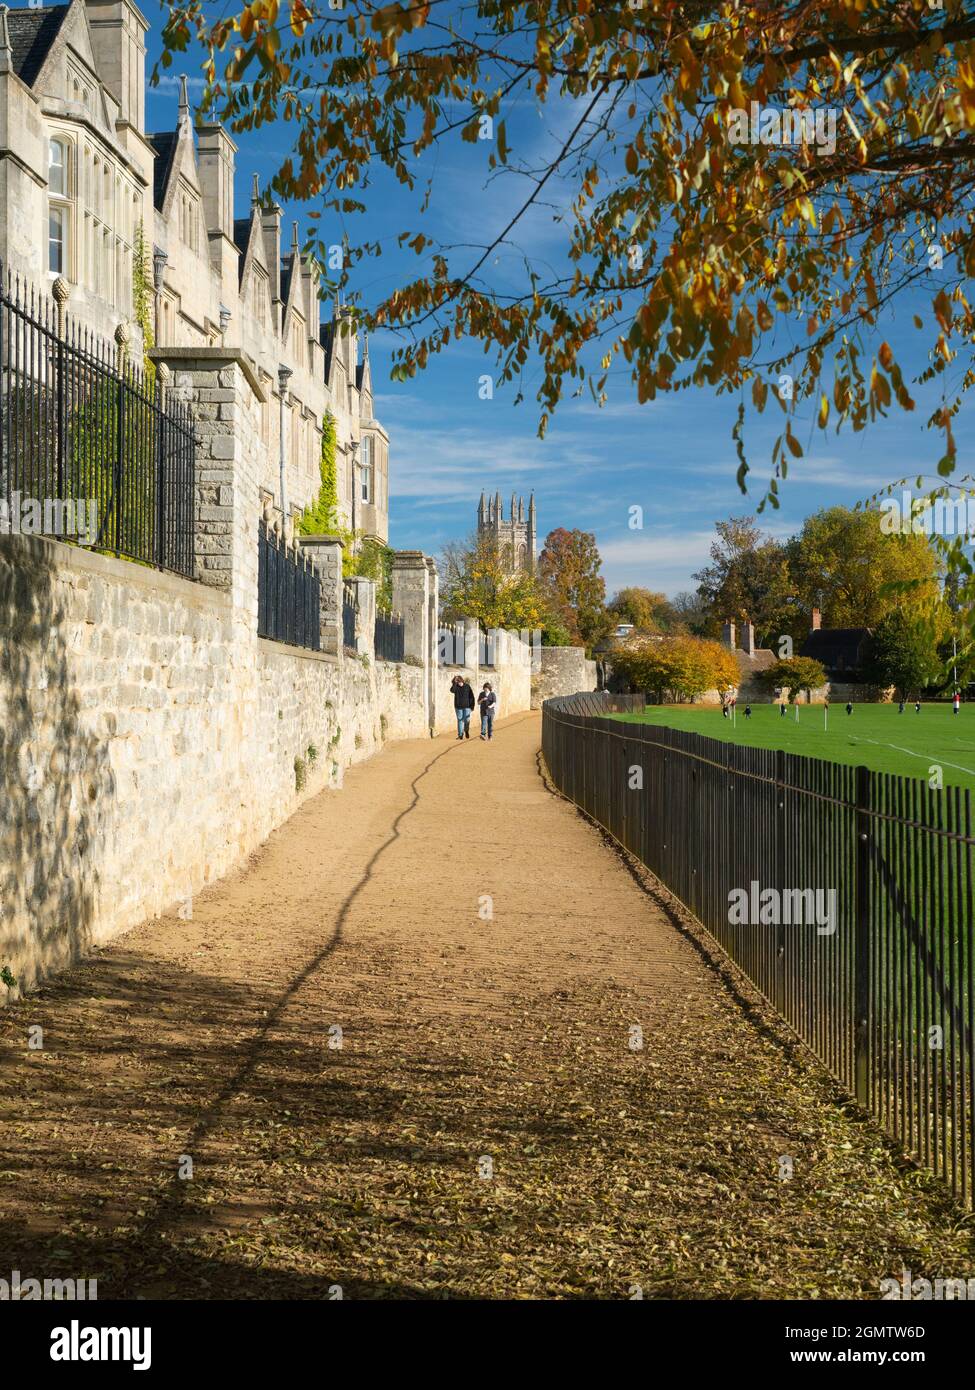 Deadman's Walk is a scenic footpath running east-west in central Oxford, England, situated immediately to the south of Merton College, adjacent to Chr Stock Photo